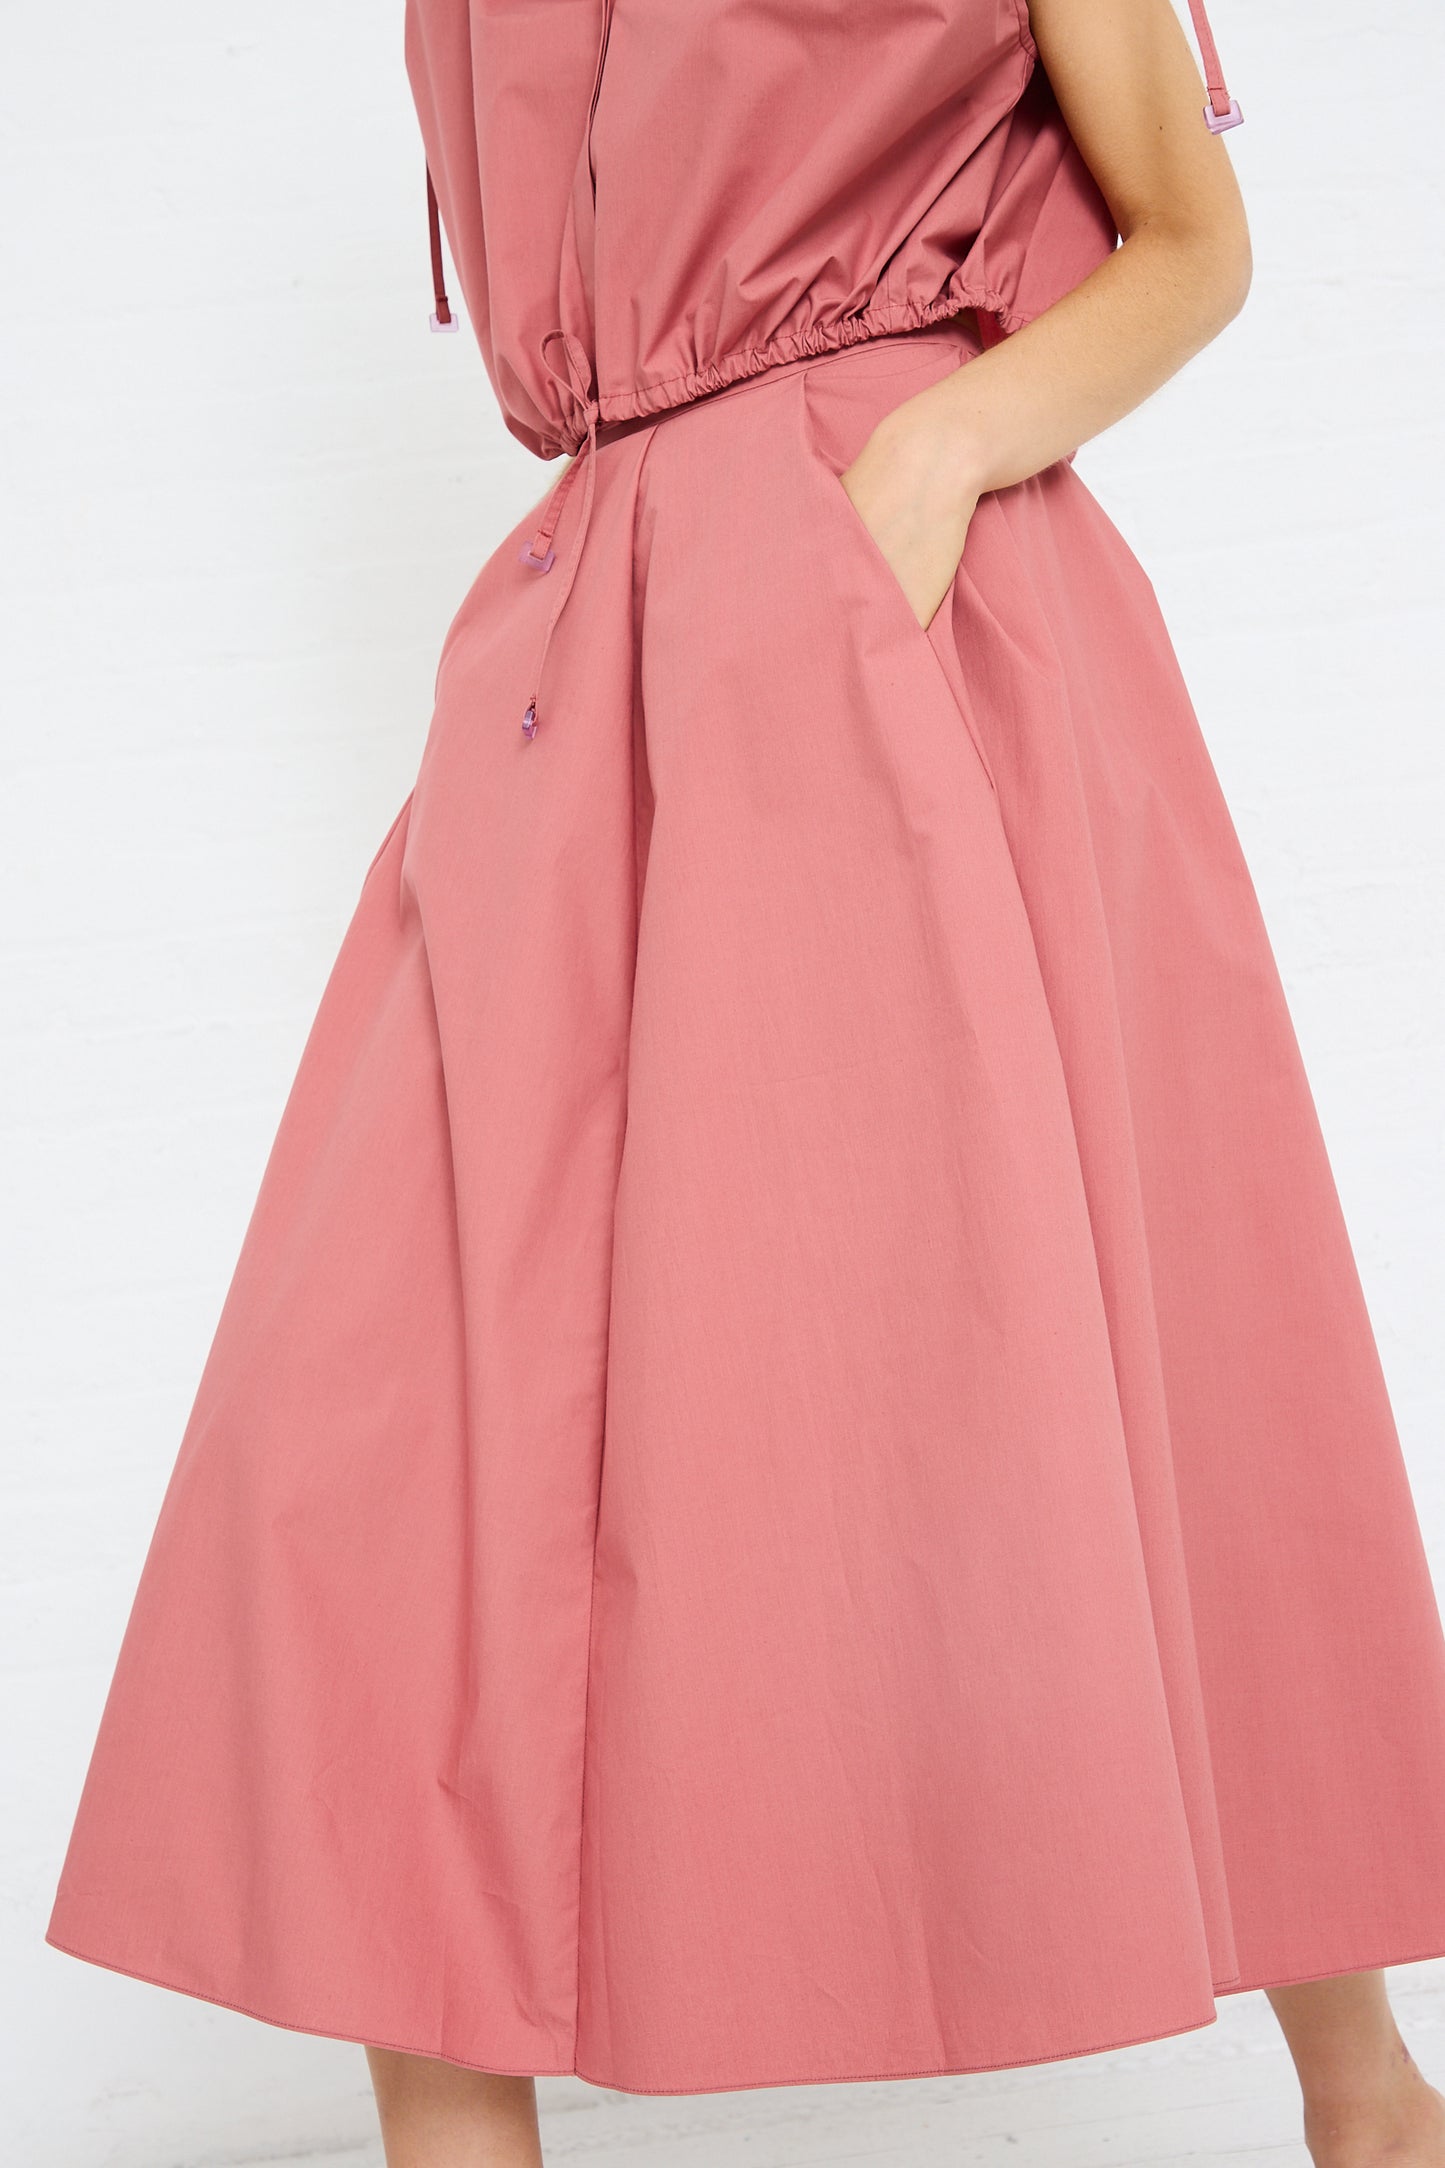 Woman showcasing the detail of a pink, wide-leg, pleated Cotton Poplin Skirt in Canyon by Veronique Leroy with her hand in the pocket.